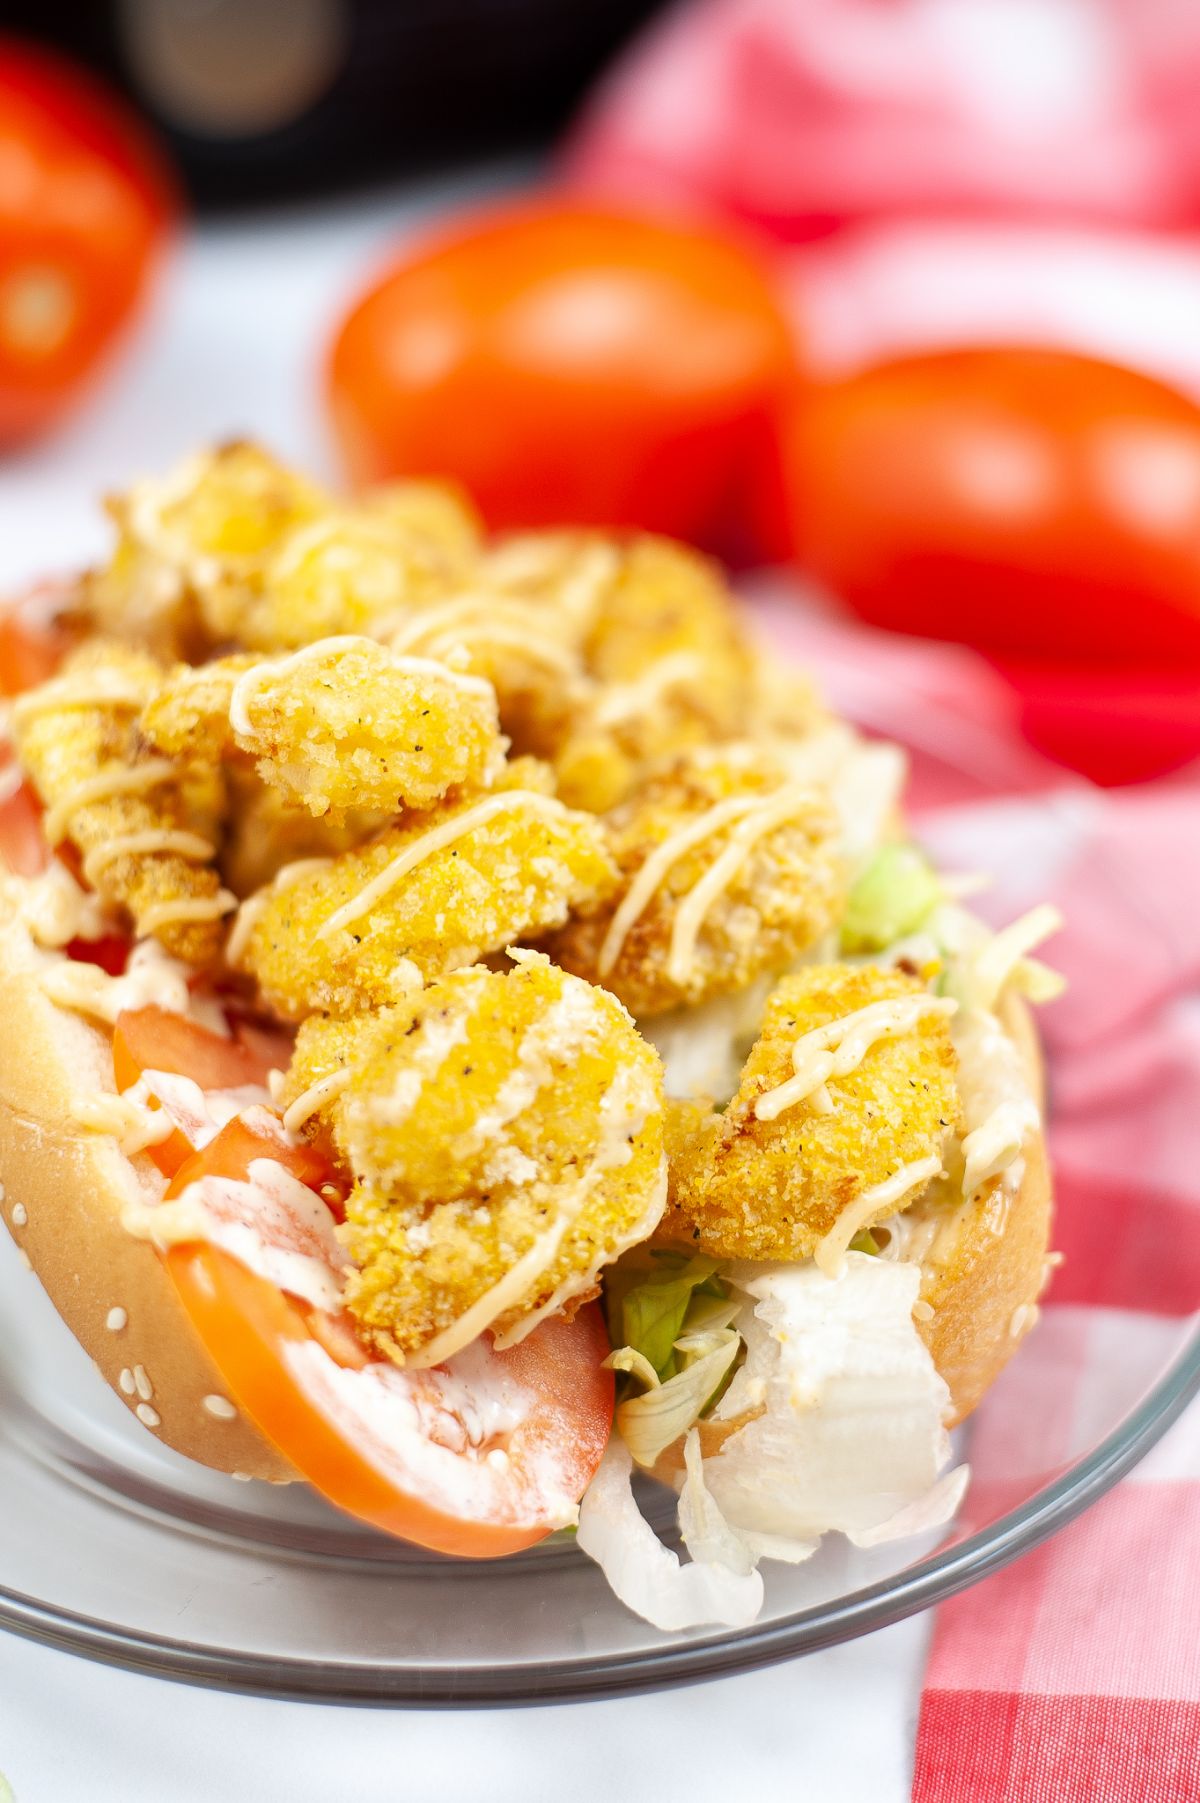 Vertical image of Air Fryer Shrimp Po Boy on a glass serving plate with blurred tomatoes in the background.